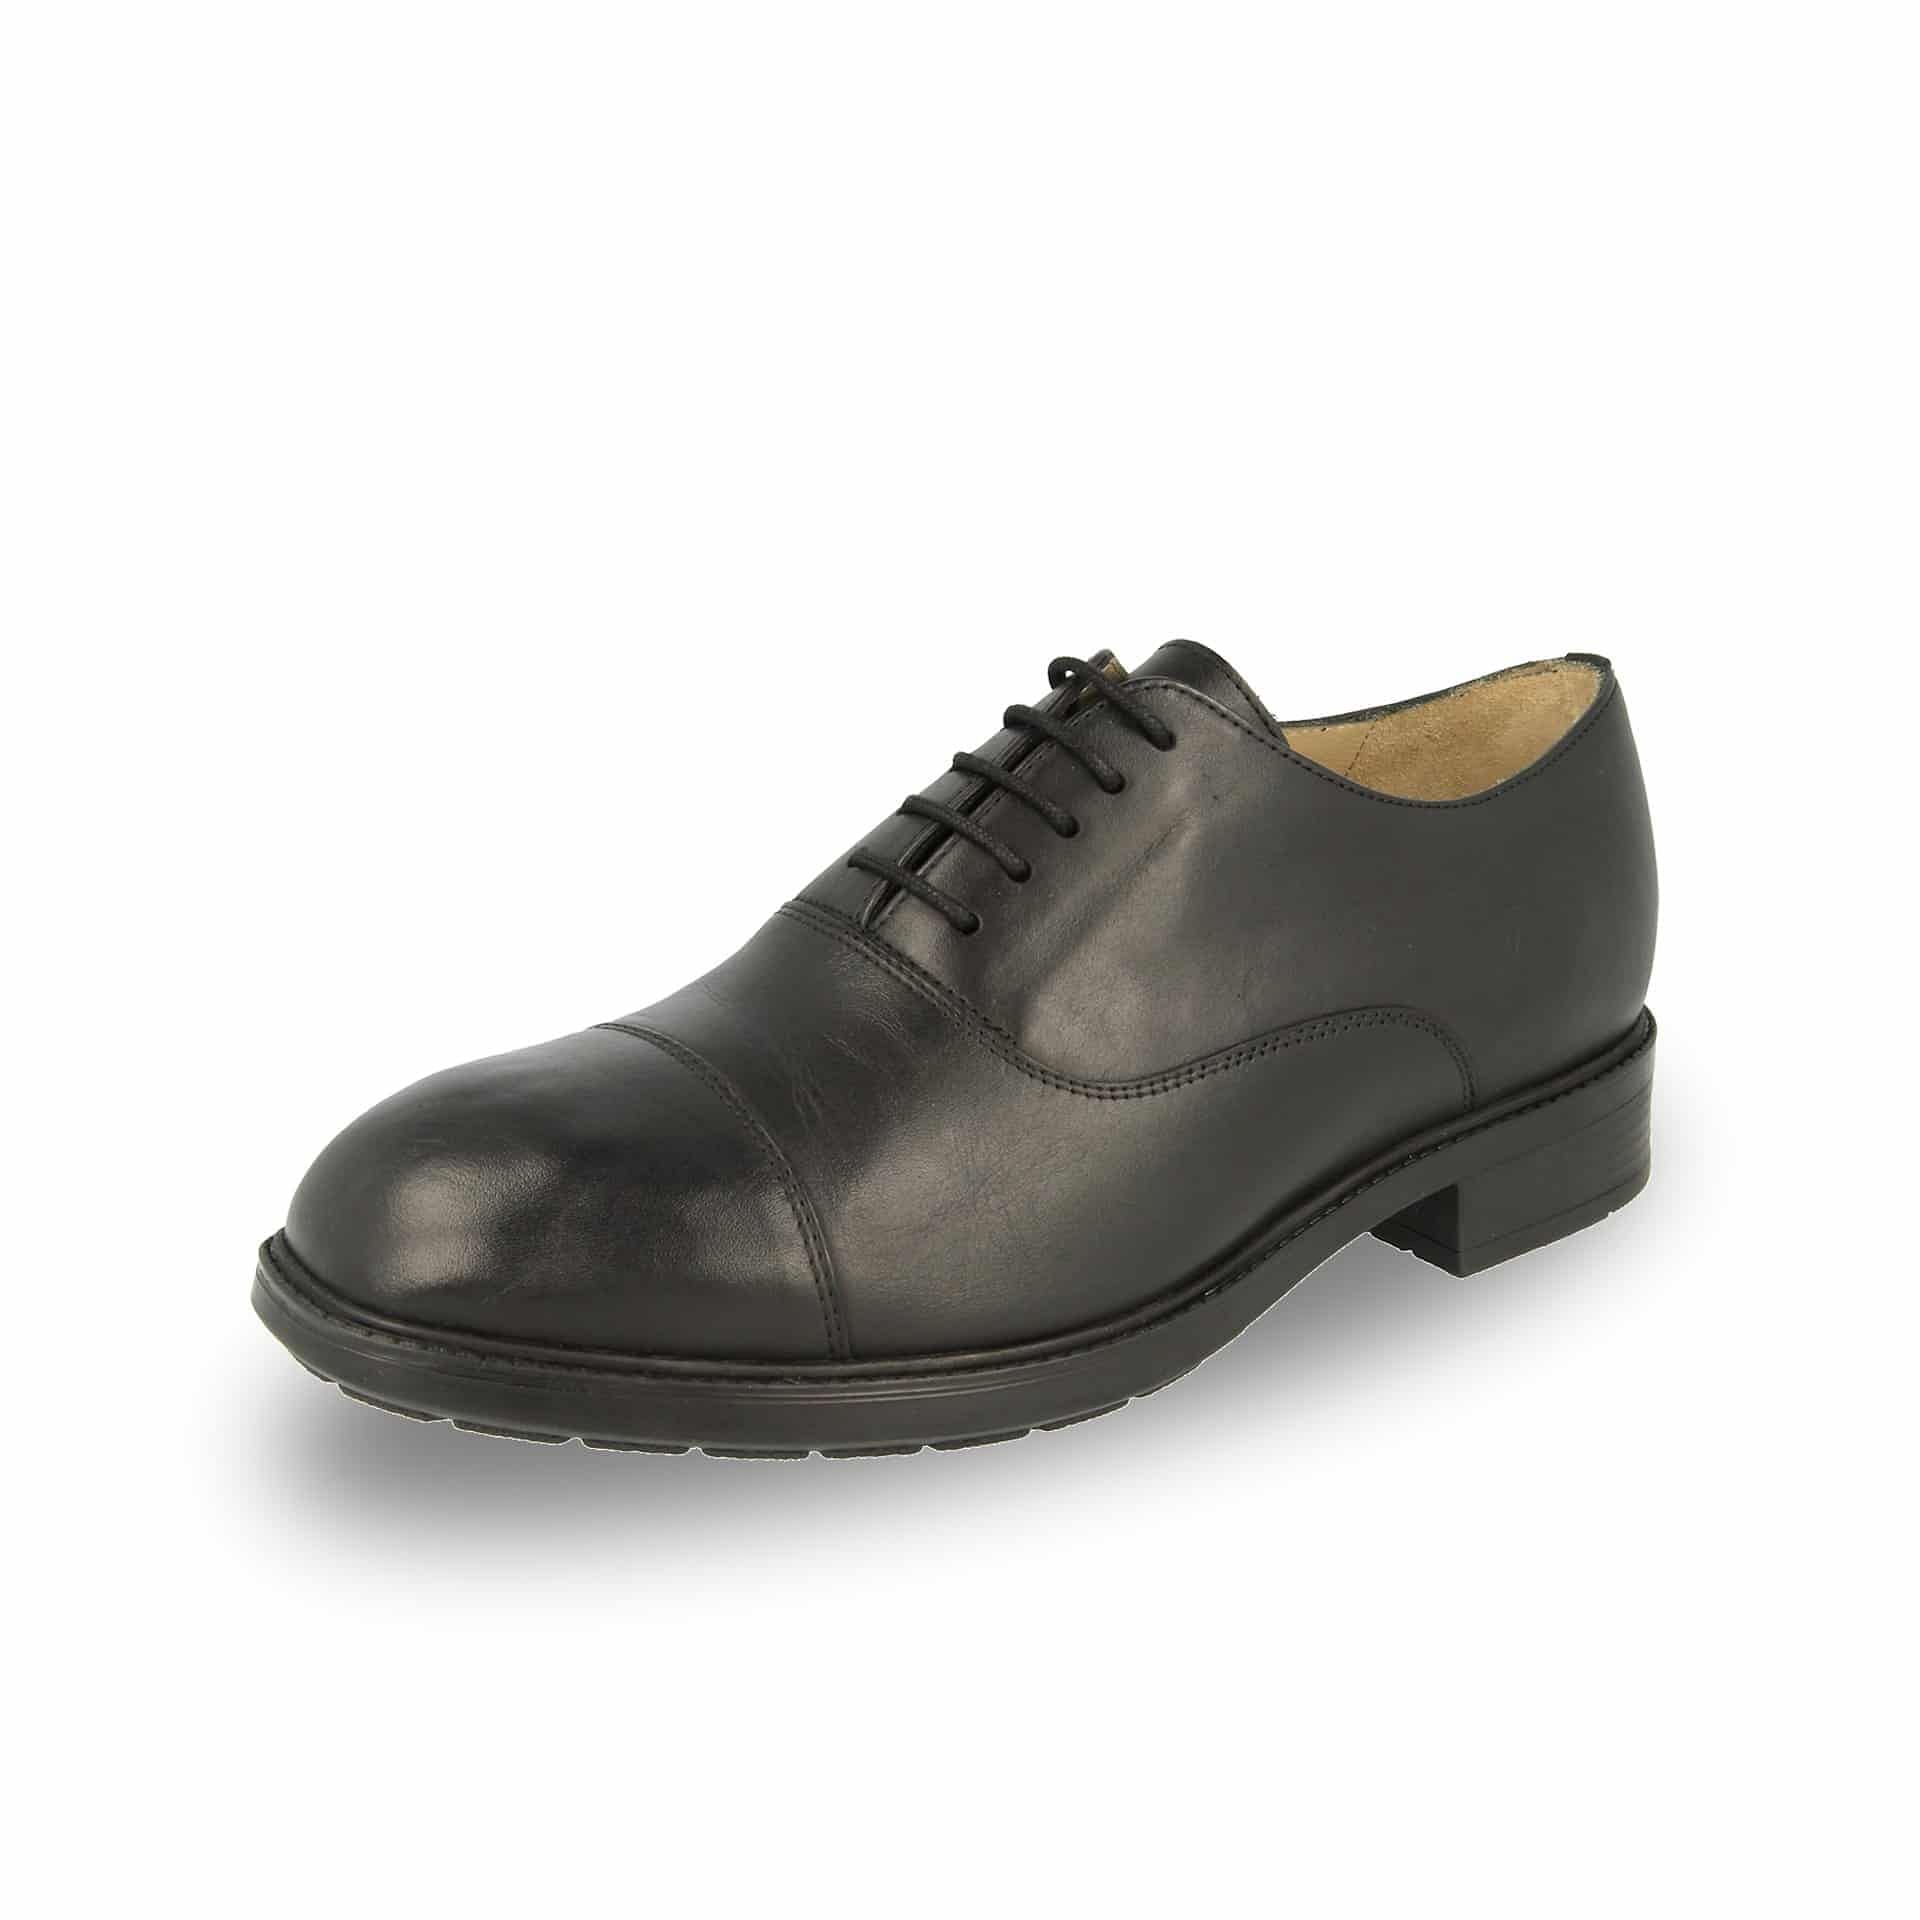 extra wide black dress shoes